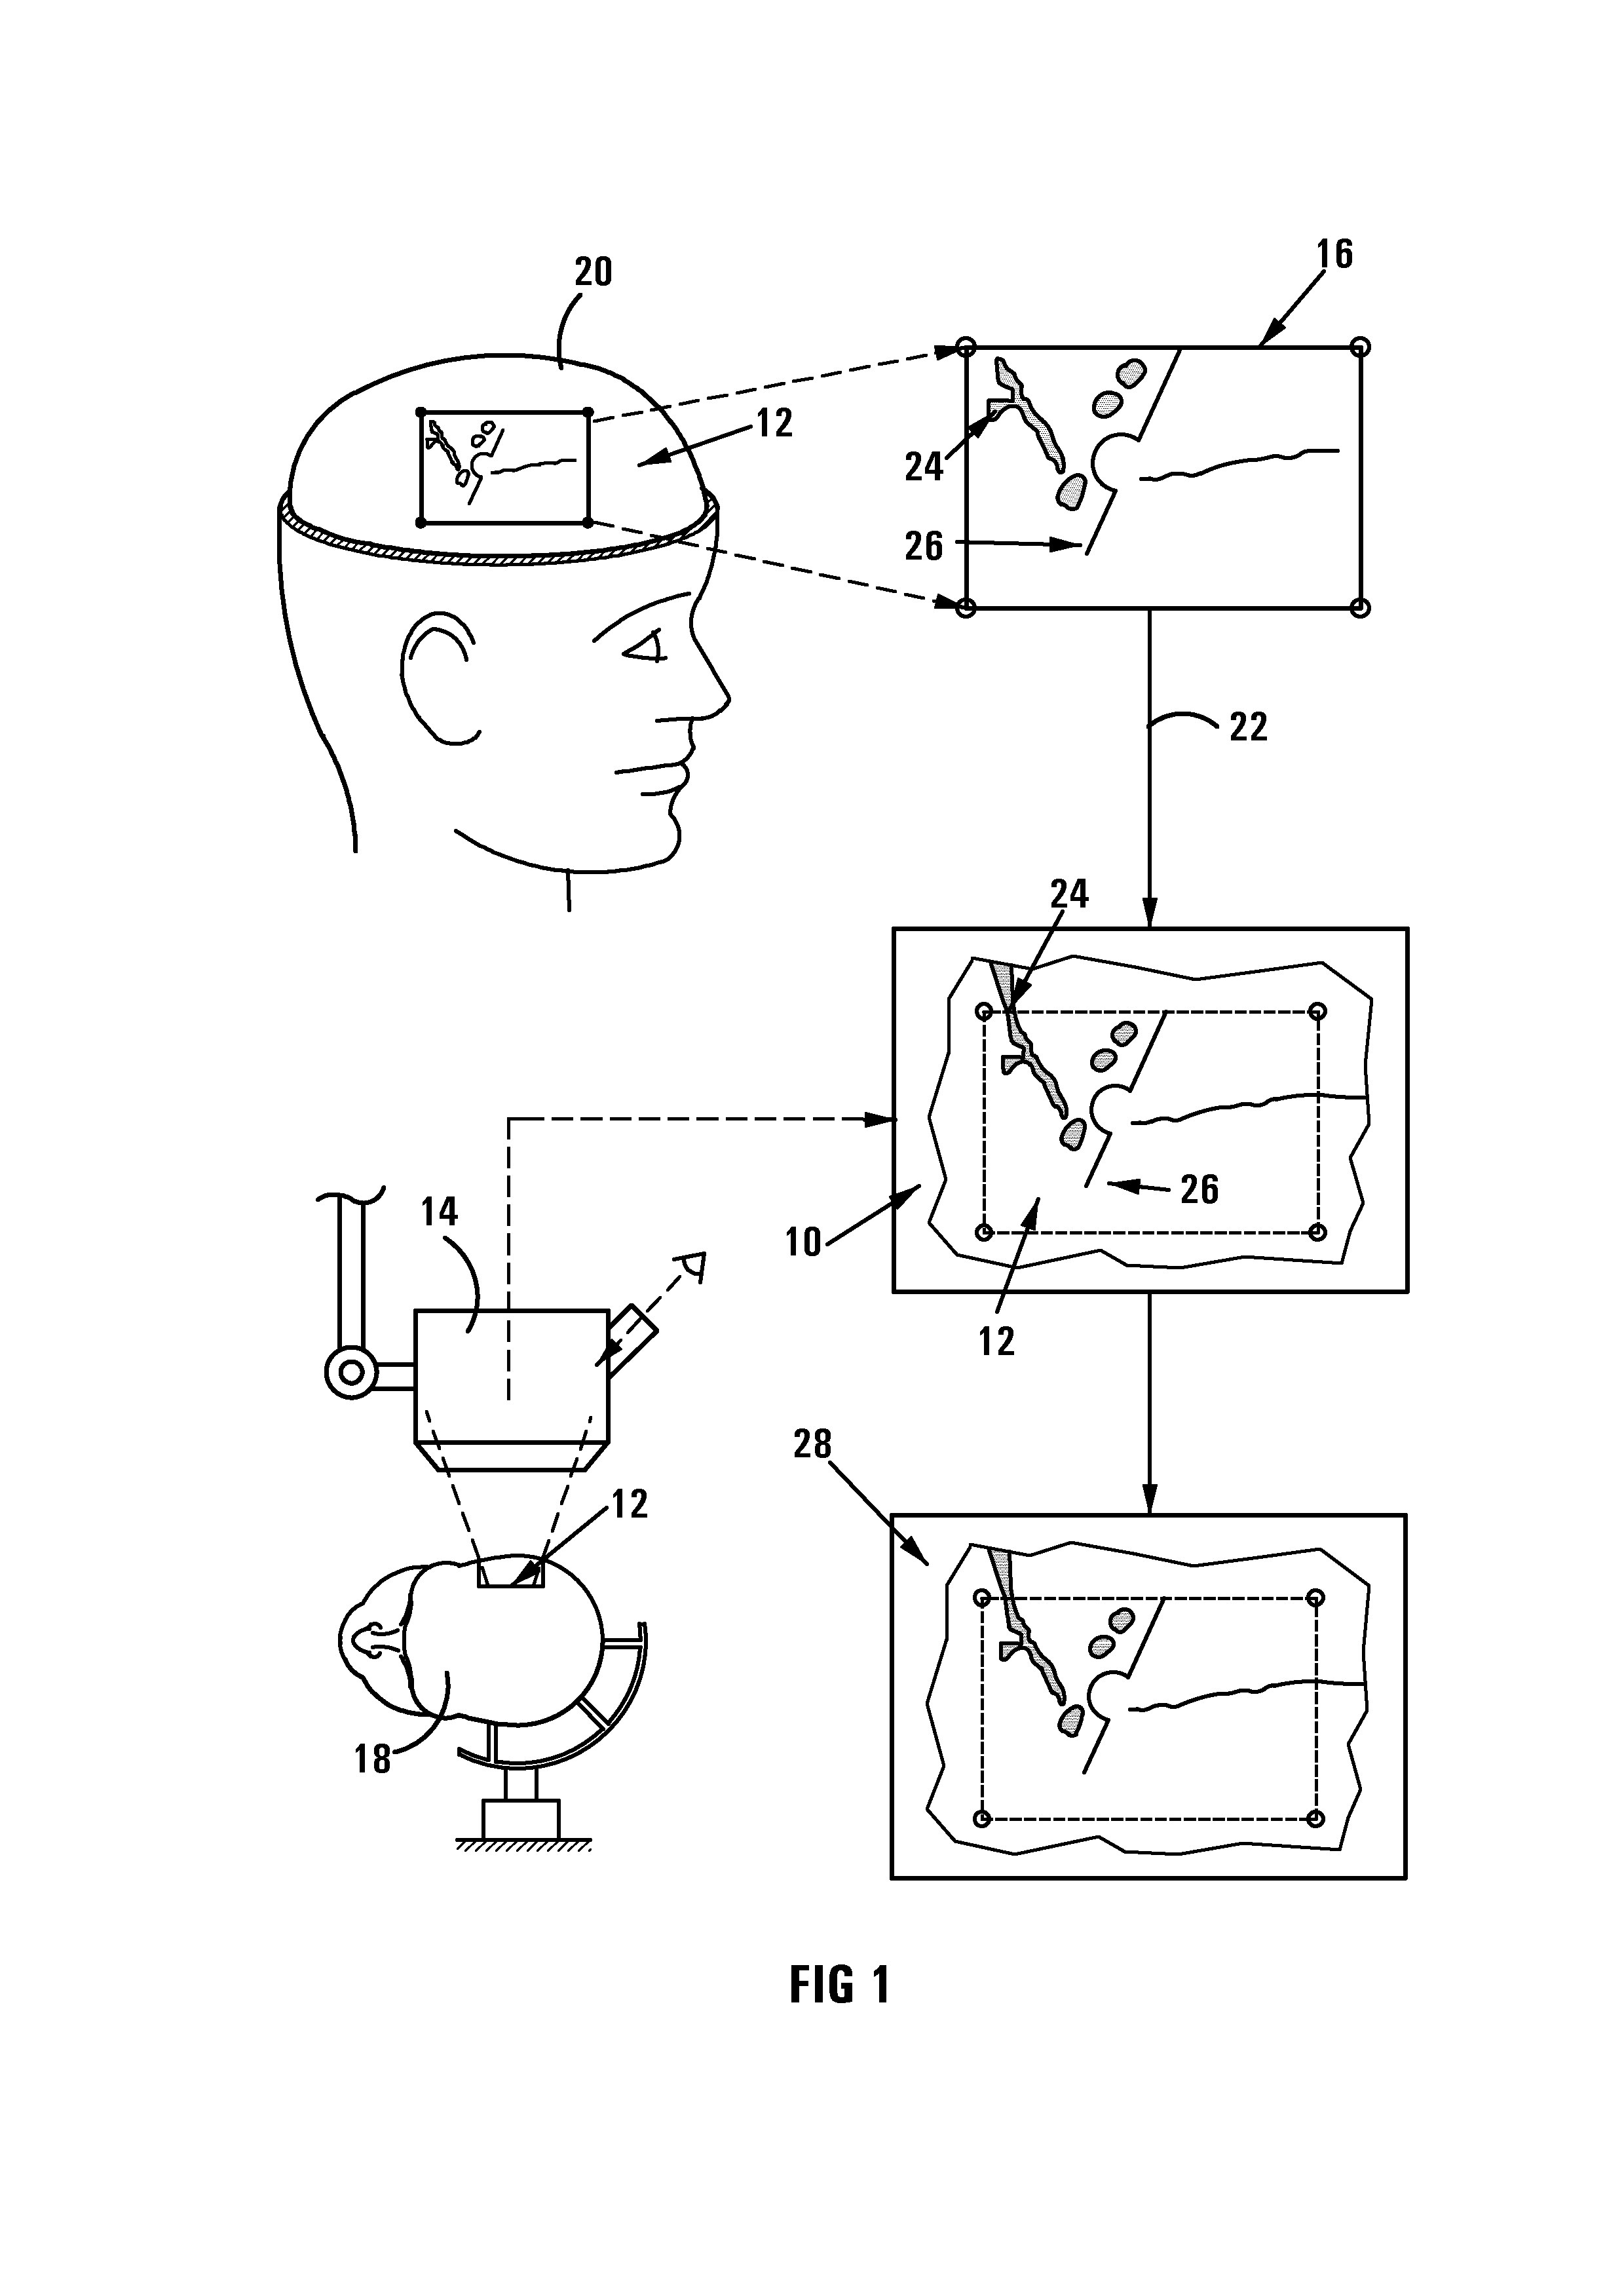 Method of and system for overlaying nbs functional data on a live image of a brain